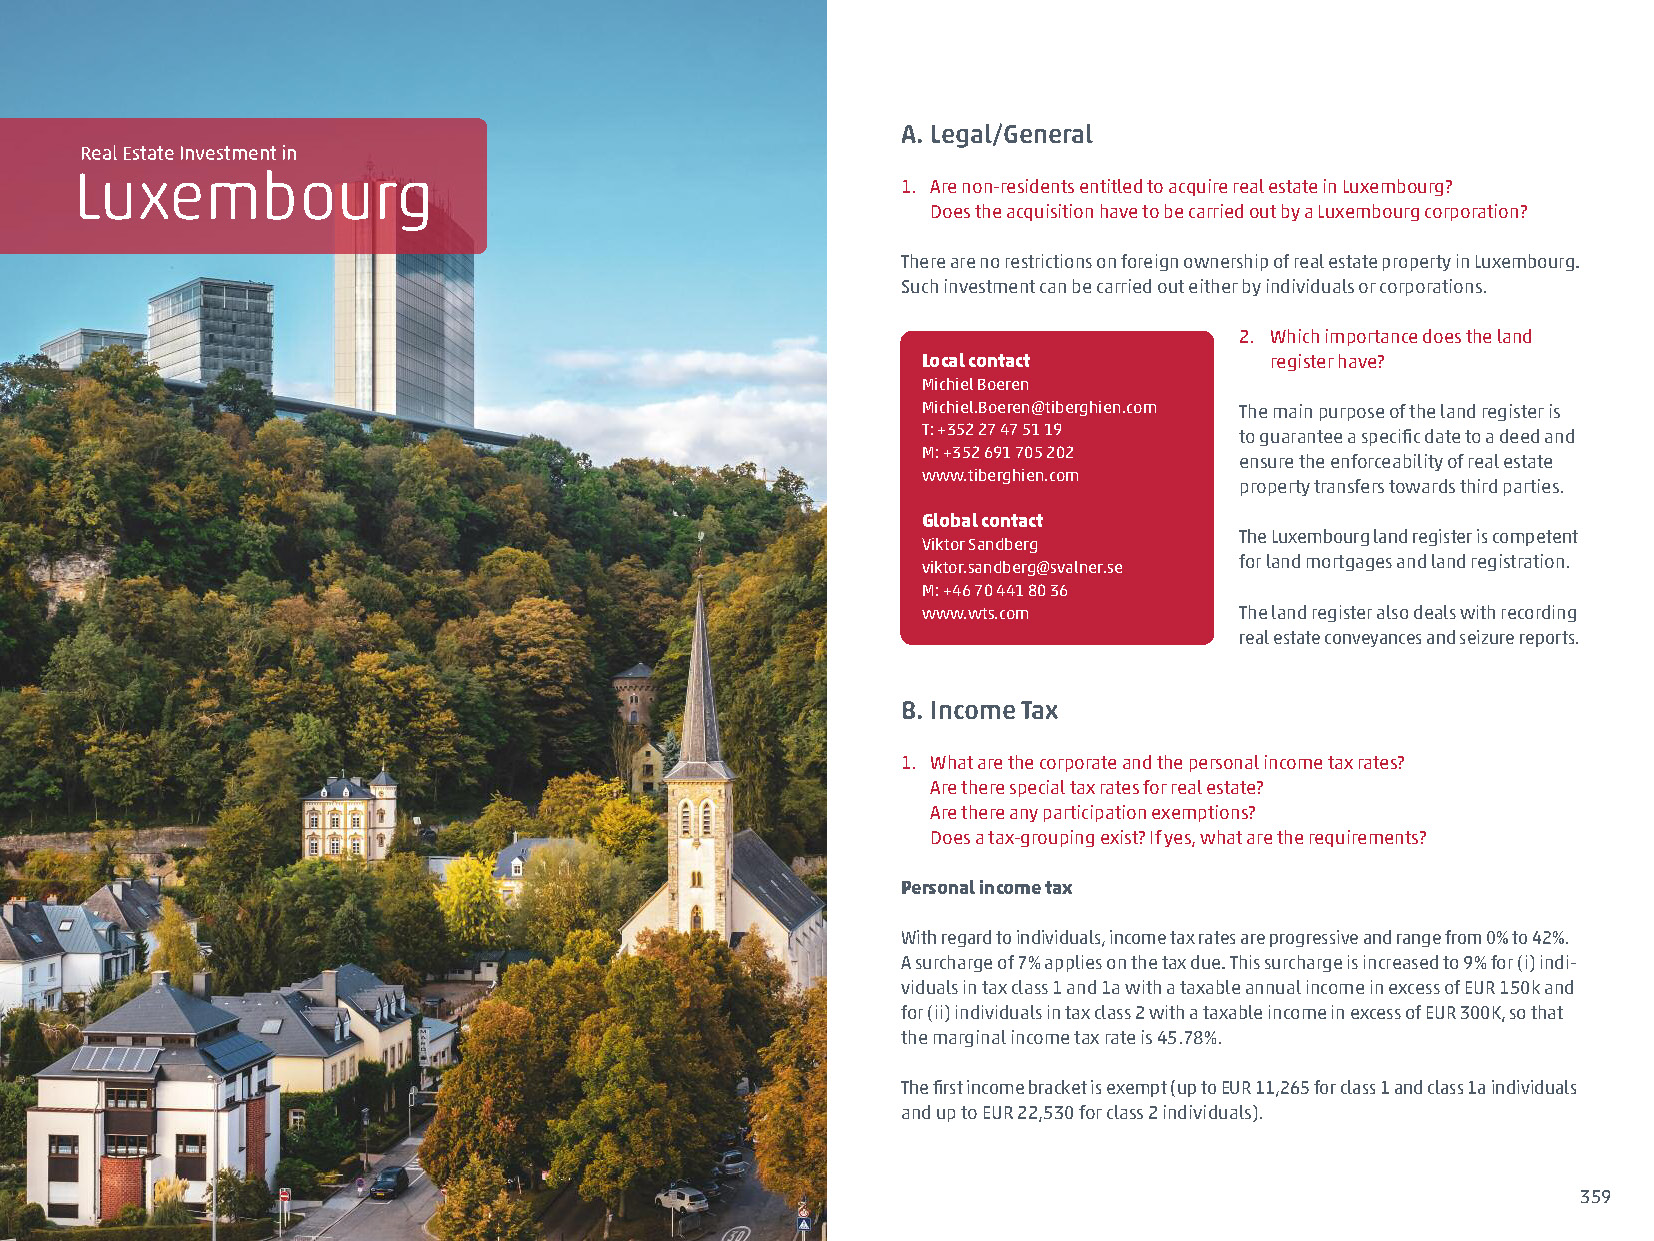 Real Estate guide 2020 Luxemburg